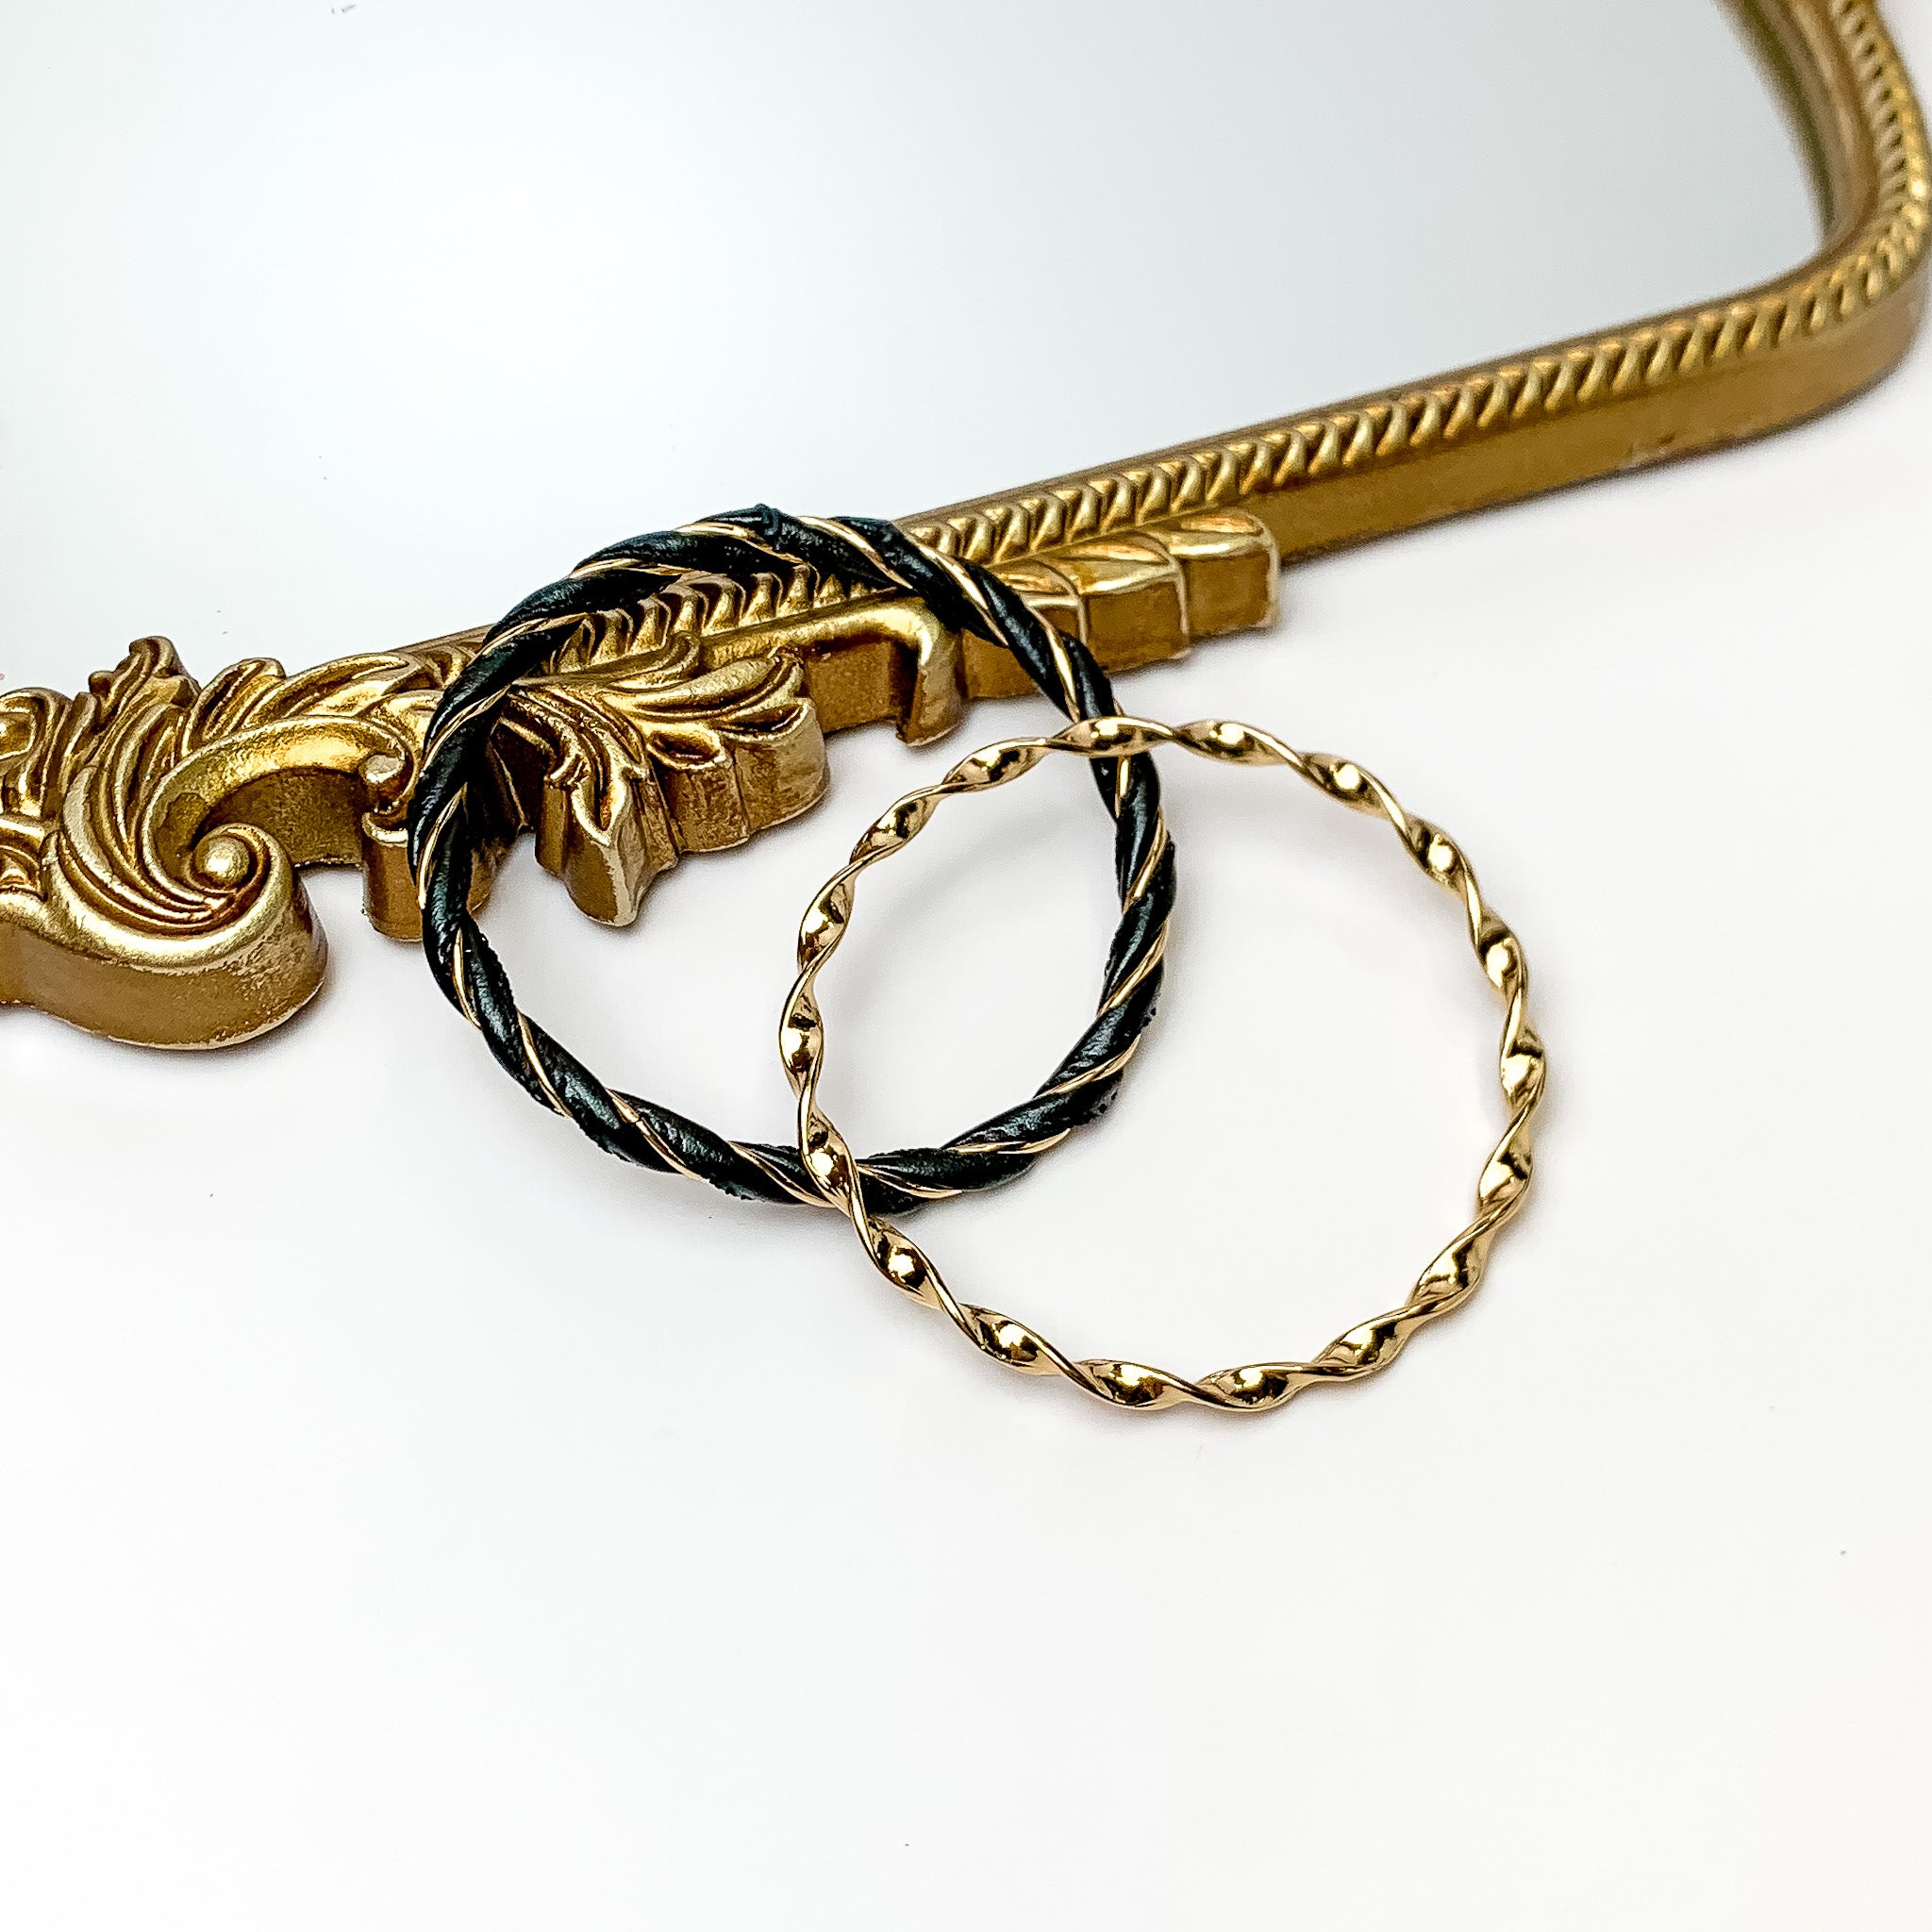 Pictured is a gold twist bangle and gold and black twist bangle. These bangles are pictured partially leaning on a gold mirror on a white background. 